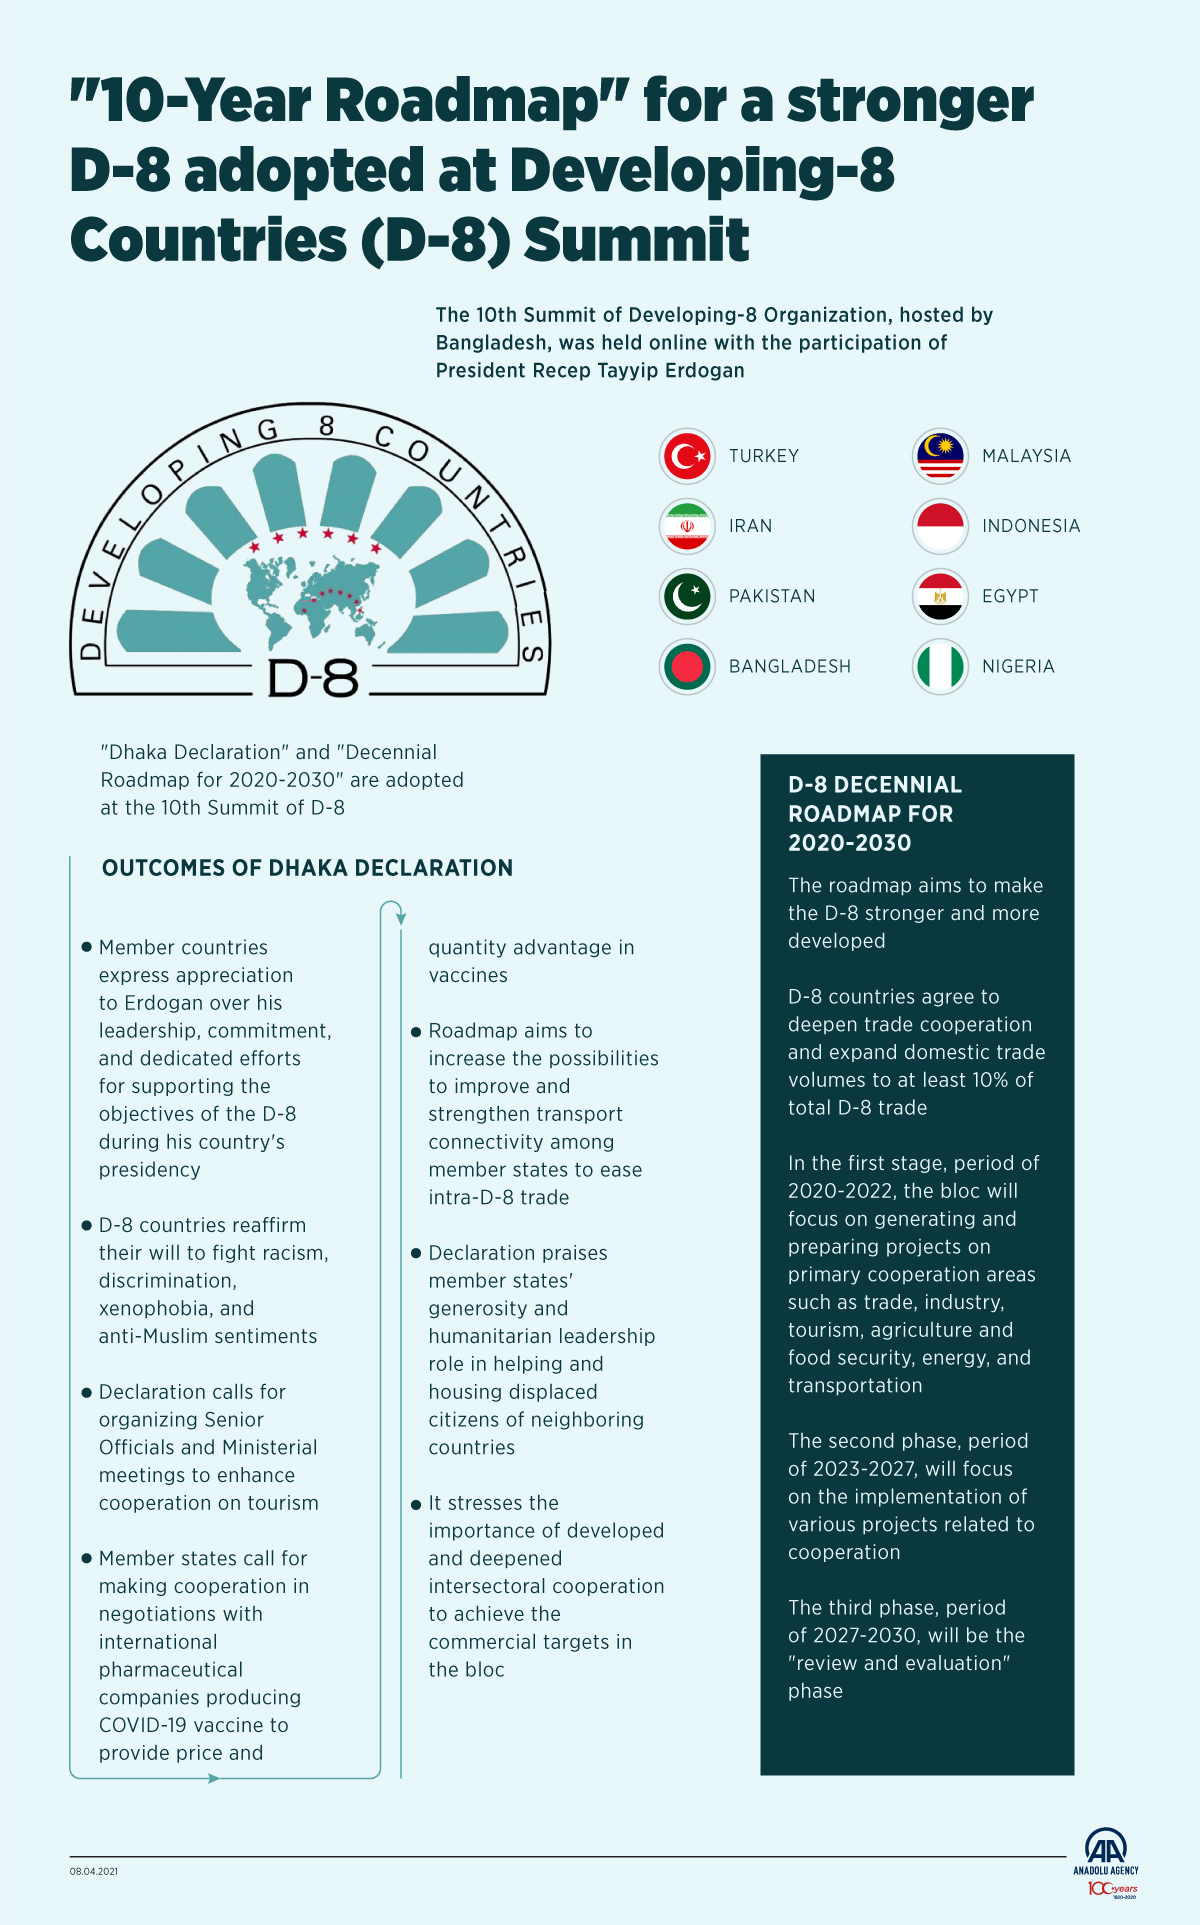 "10-Year Roadmap" for a stronger D-8 adopted at Developing-8 Countries (D-8) Summit